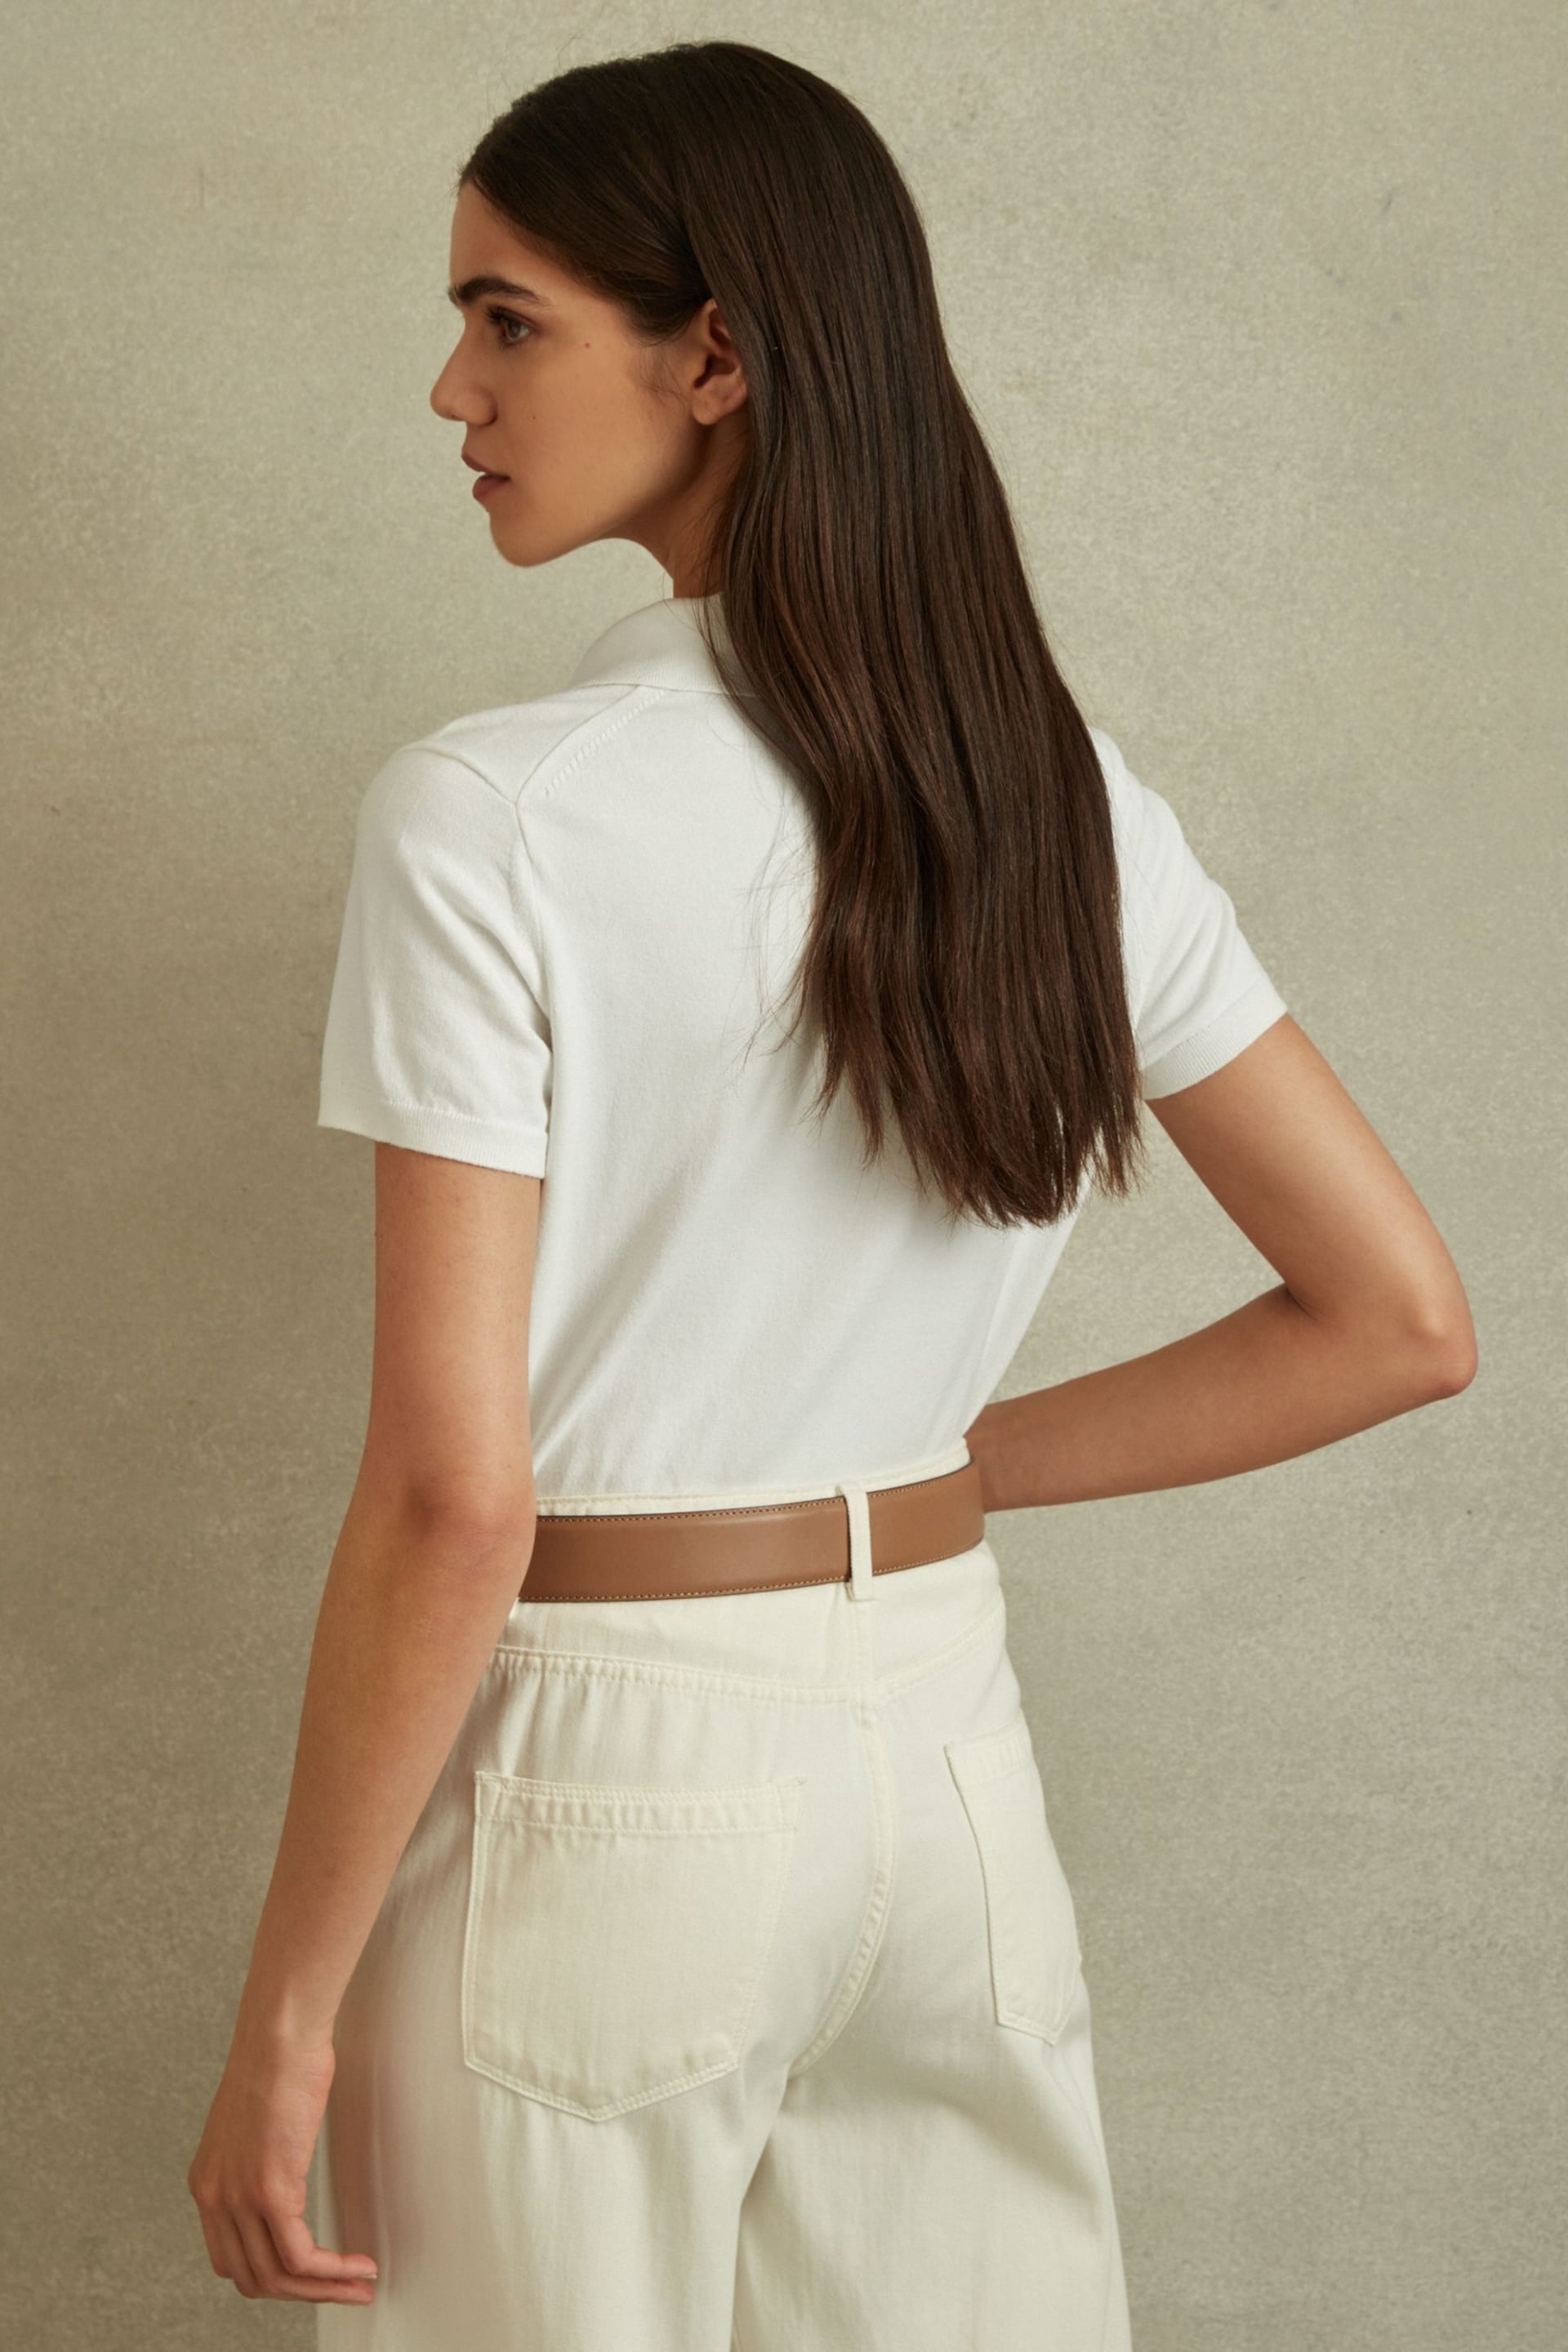 Reiss Ivory Polly Cotton Blend Polo Shirt - Image 4 of 5